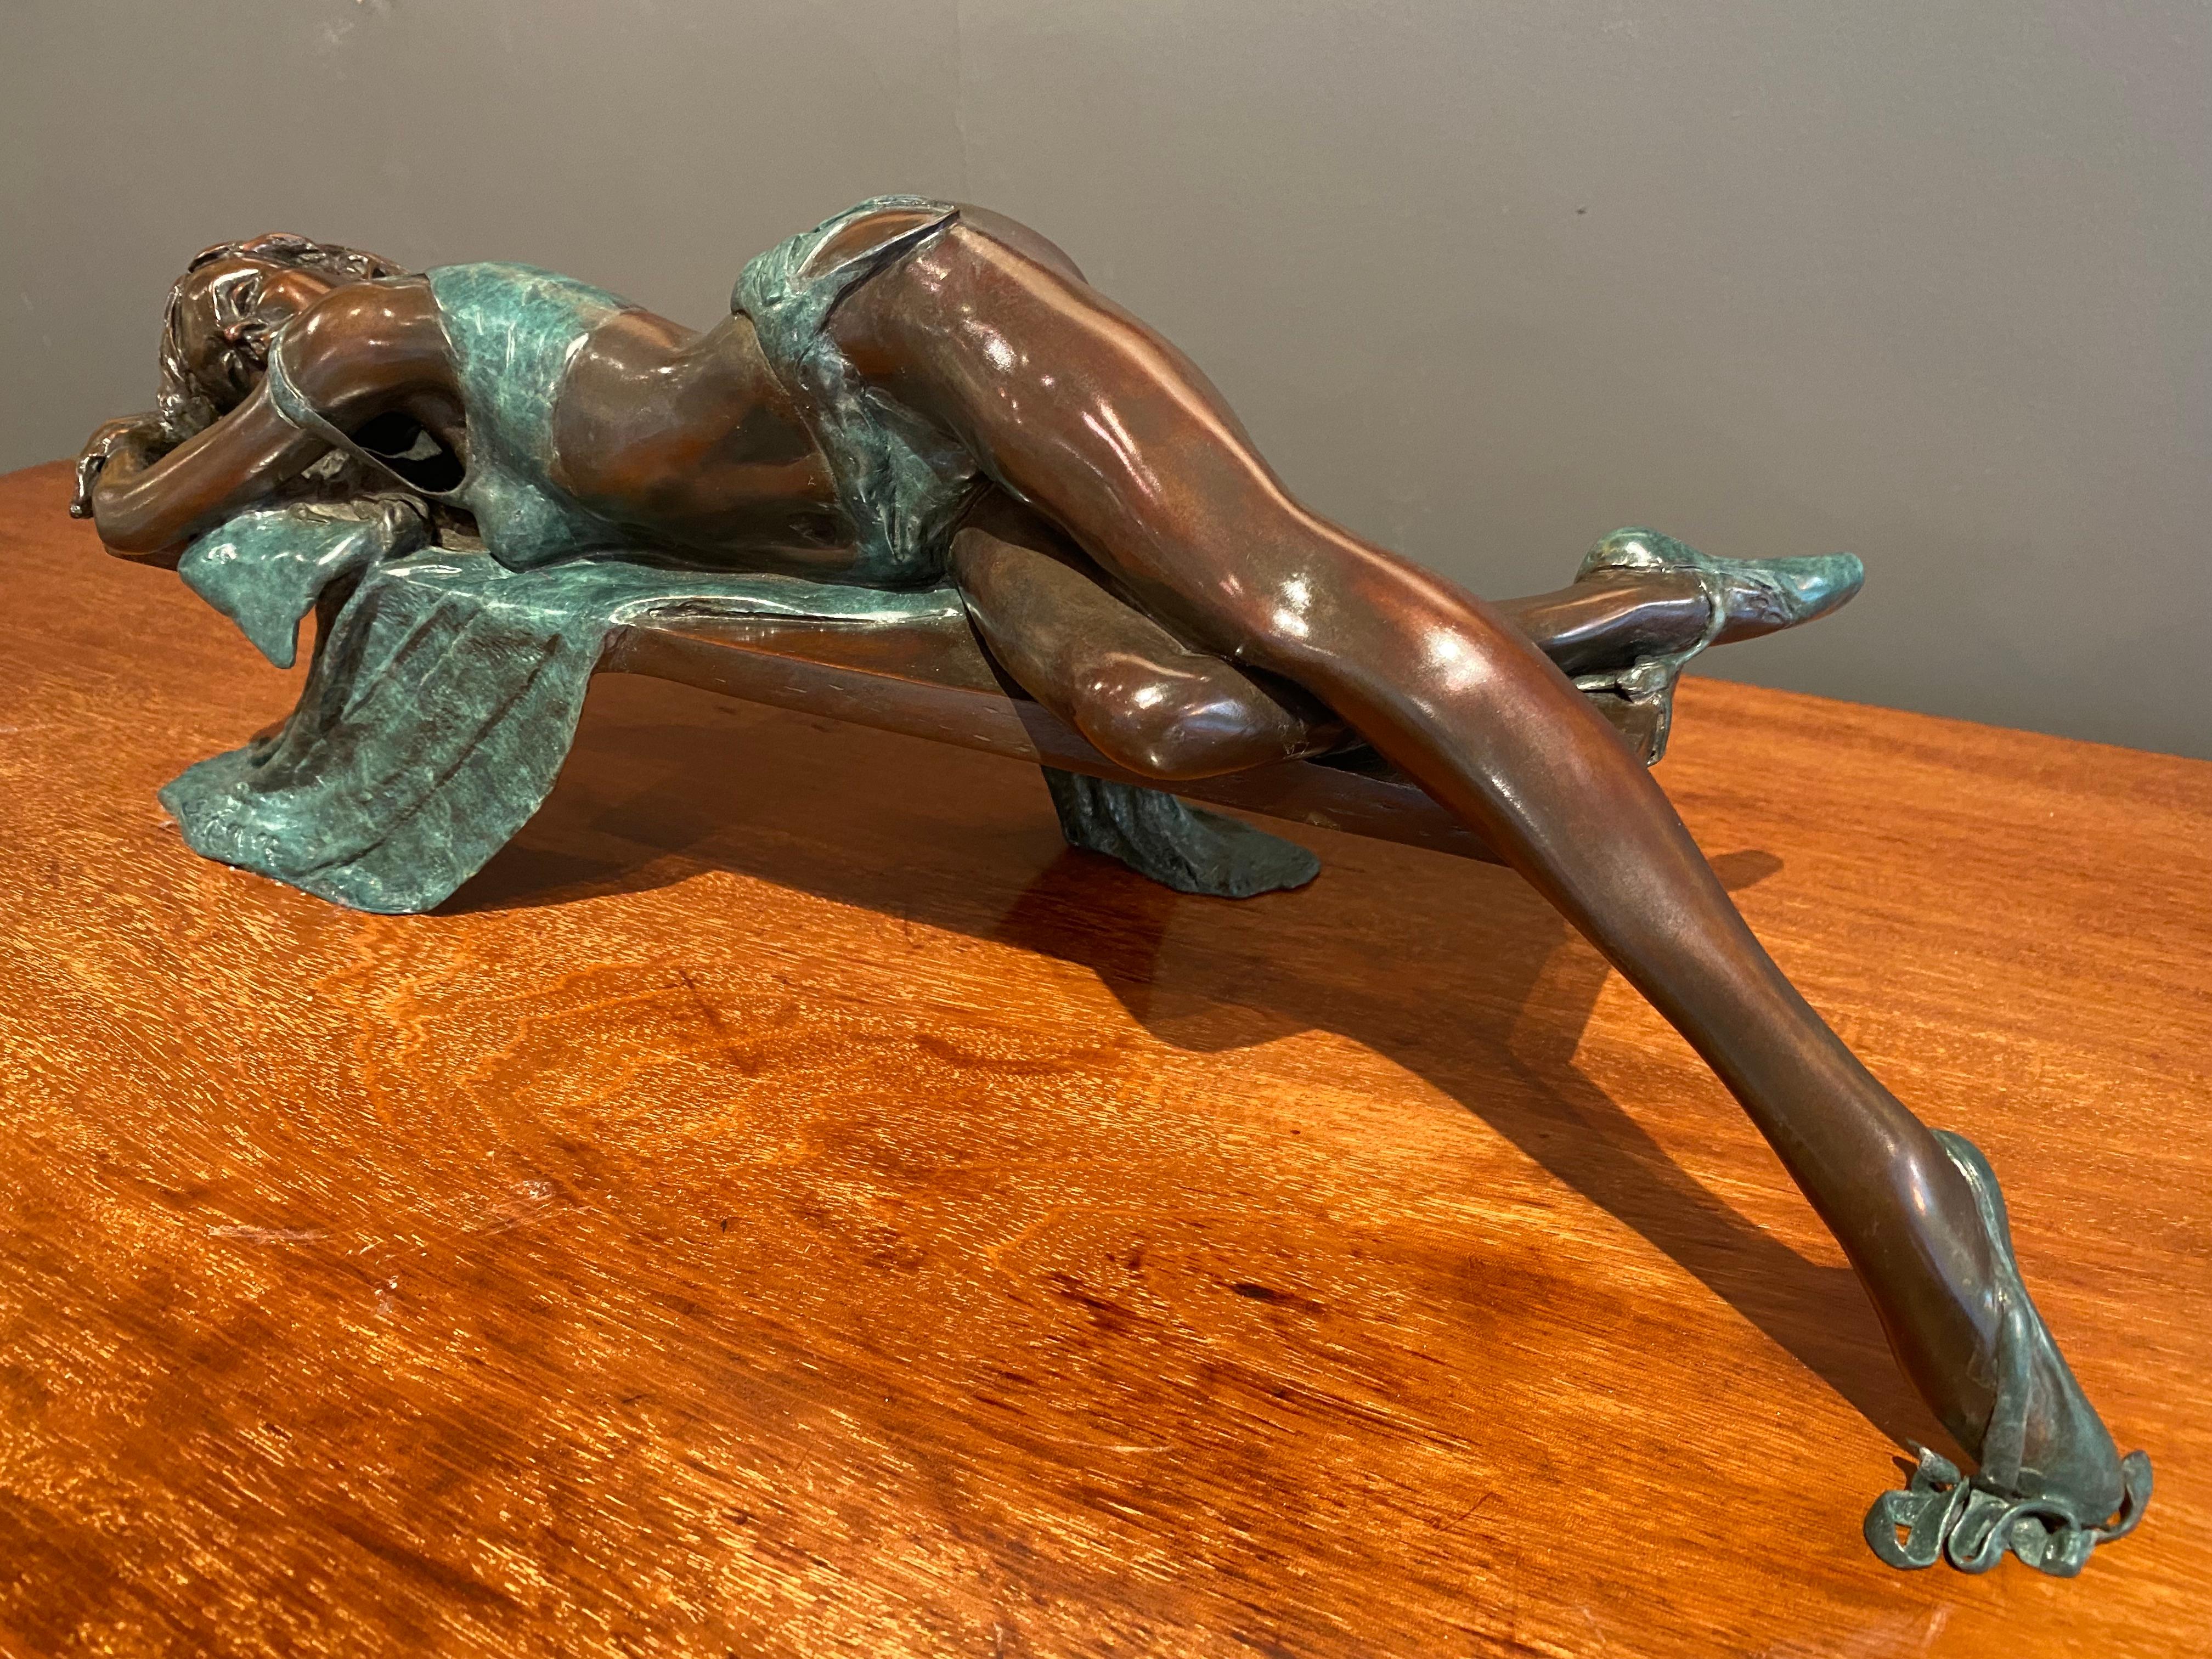 'Relaxing Dancer' by Benson Landes is a stunning 21st Century Solid Bronze Nude Figurative Ballet Dancer.
For Benson Landes, sculpture was most definitely a passion. His oeuvre of cast bronzes is populated with ‘off duty’ ballet dancers, rather